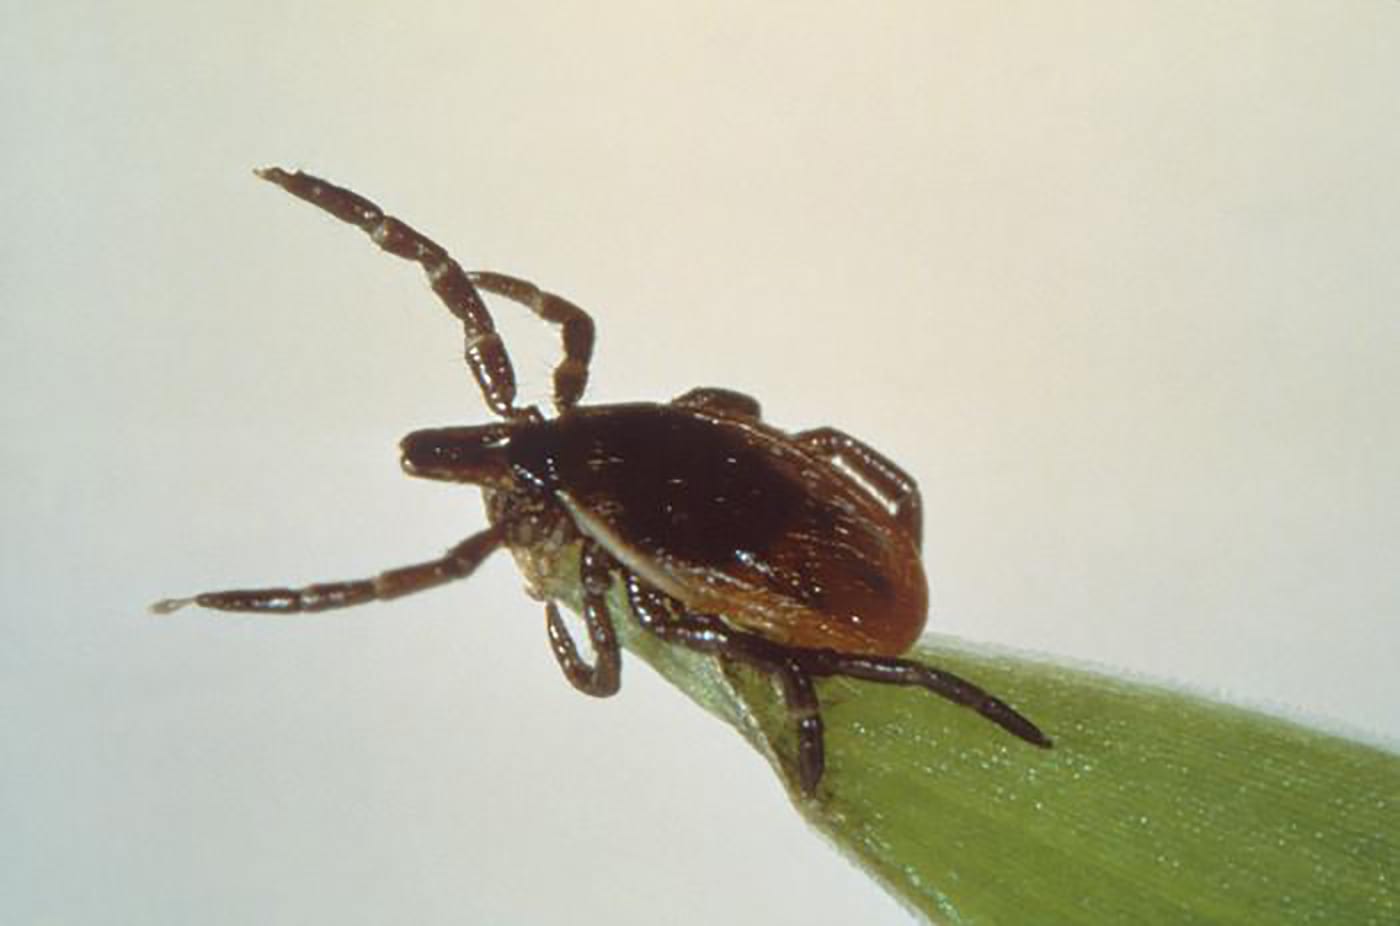 Genetically engineered mice could fight Lyme disease